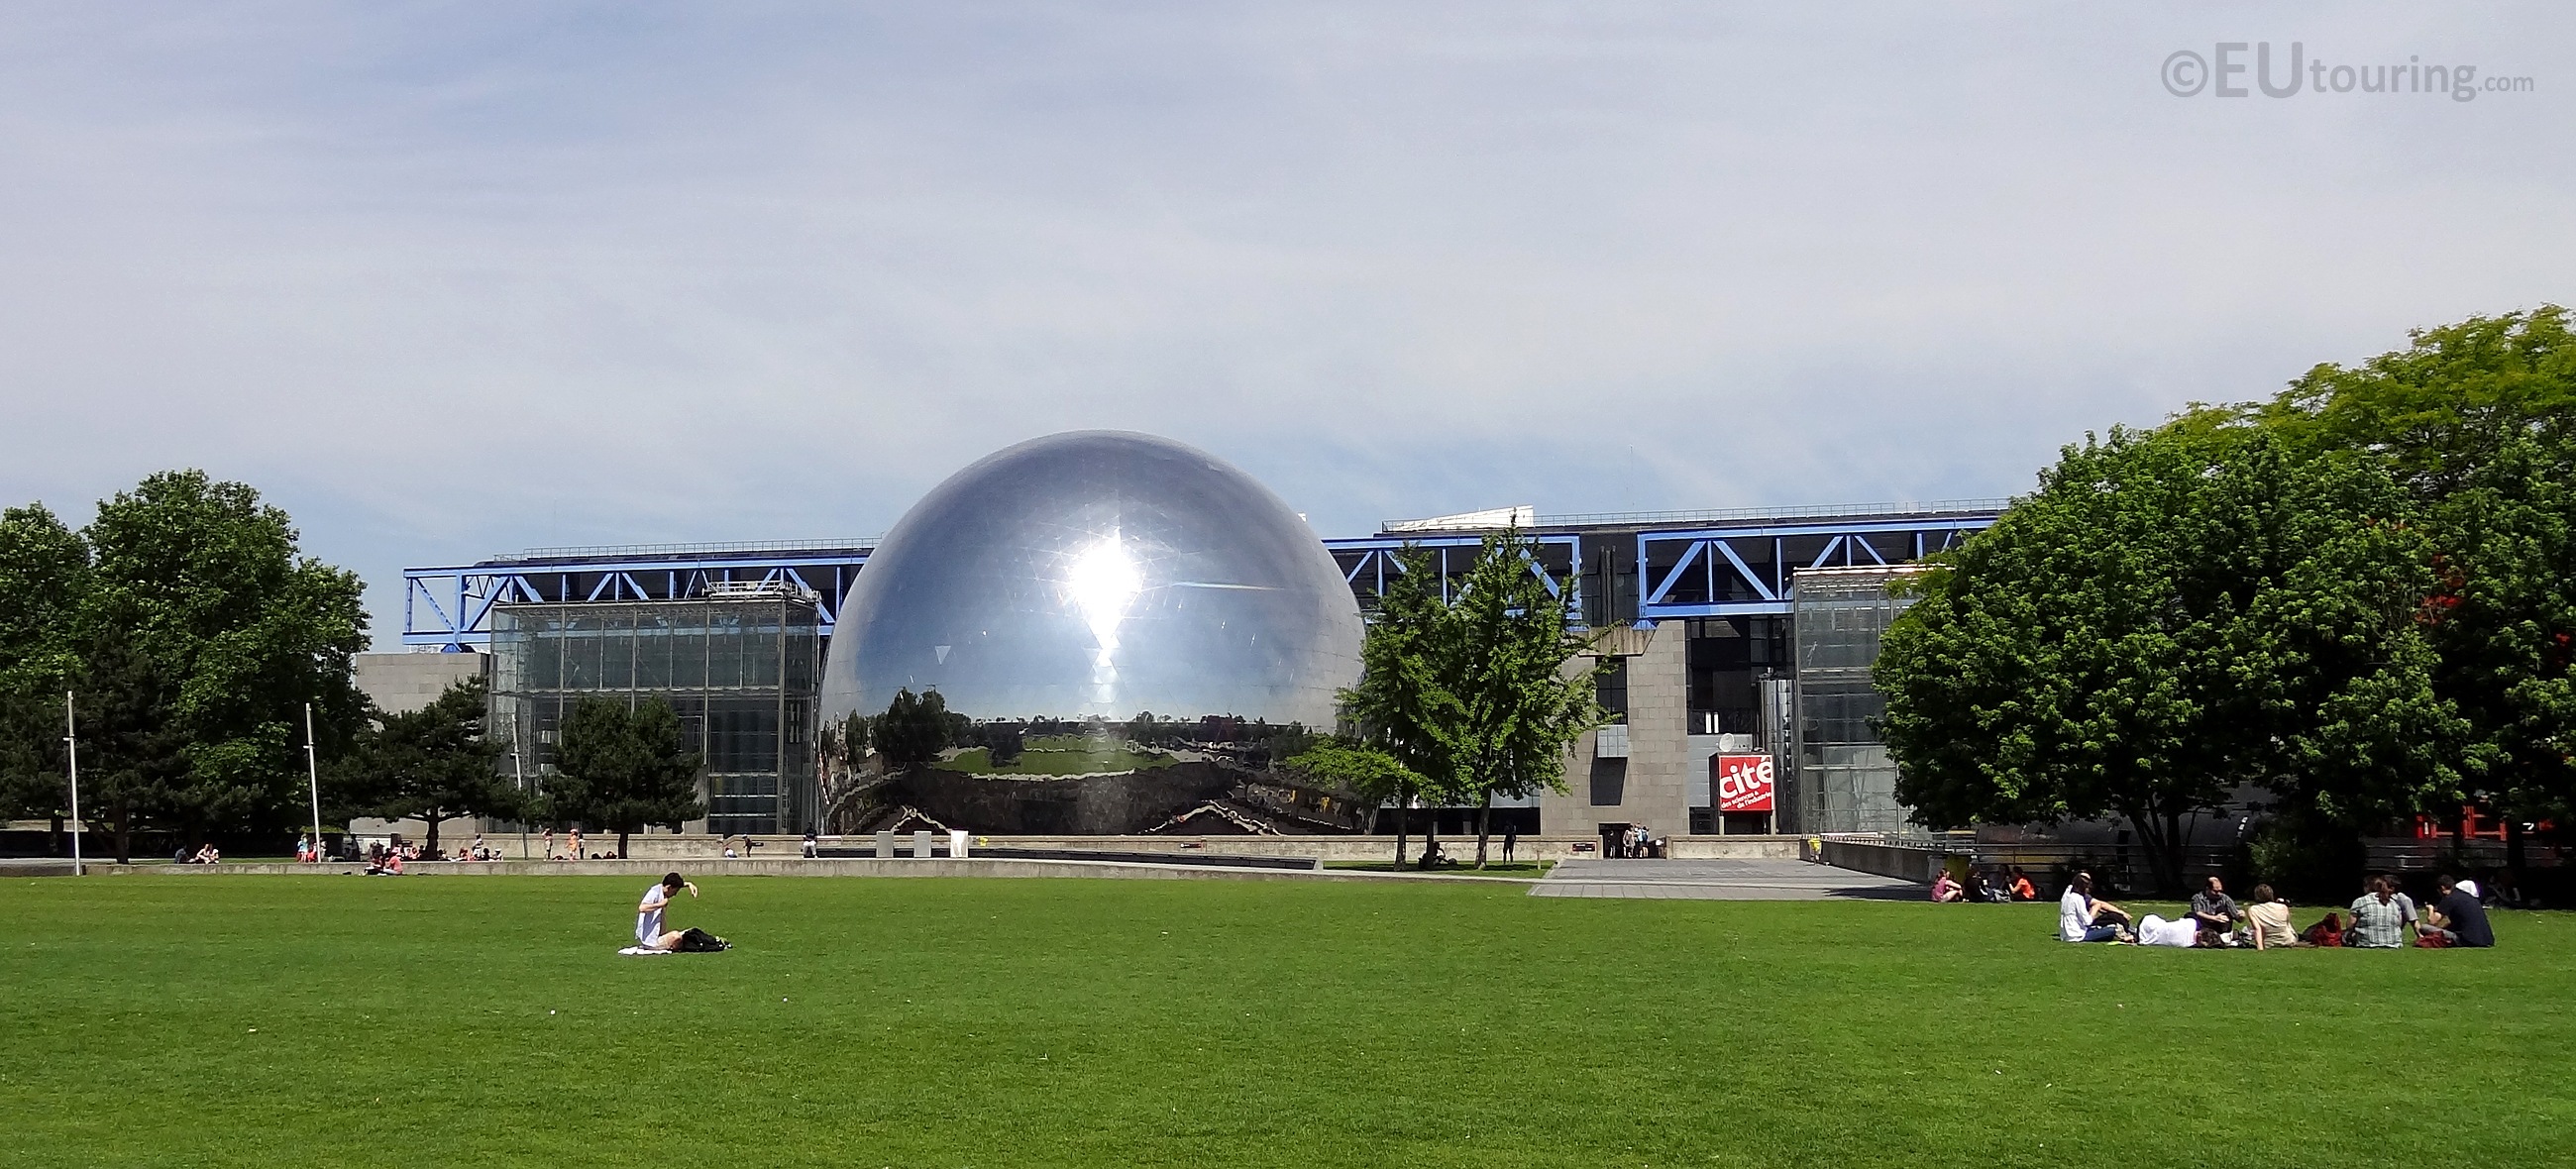 Cite des Sciences and Geode from a distance